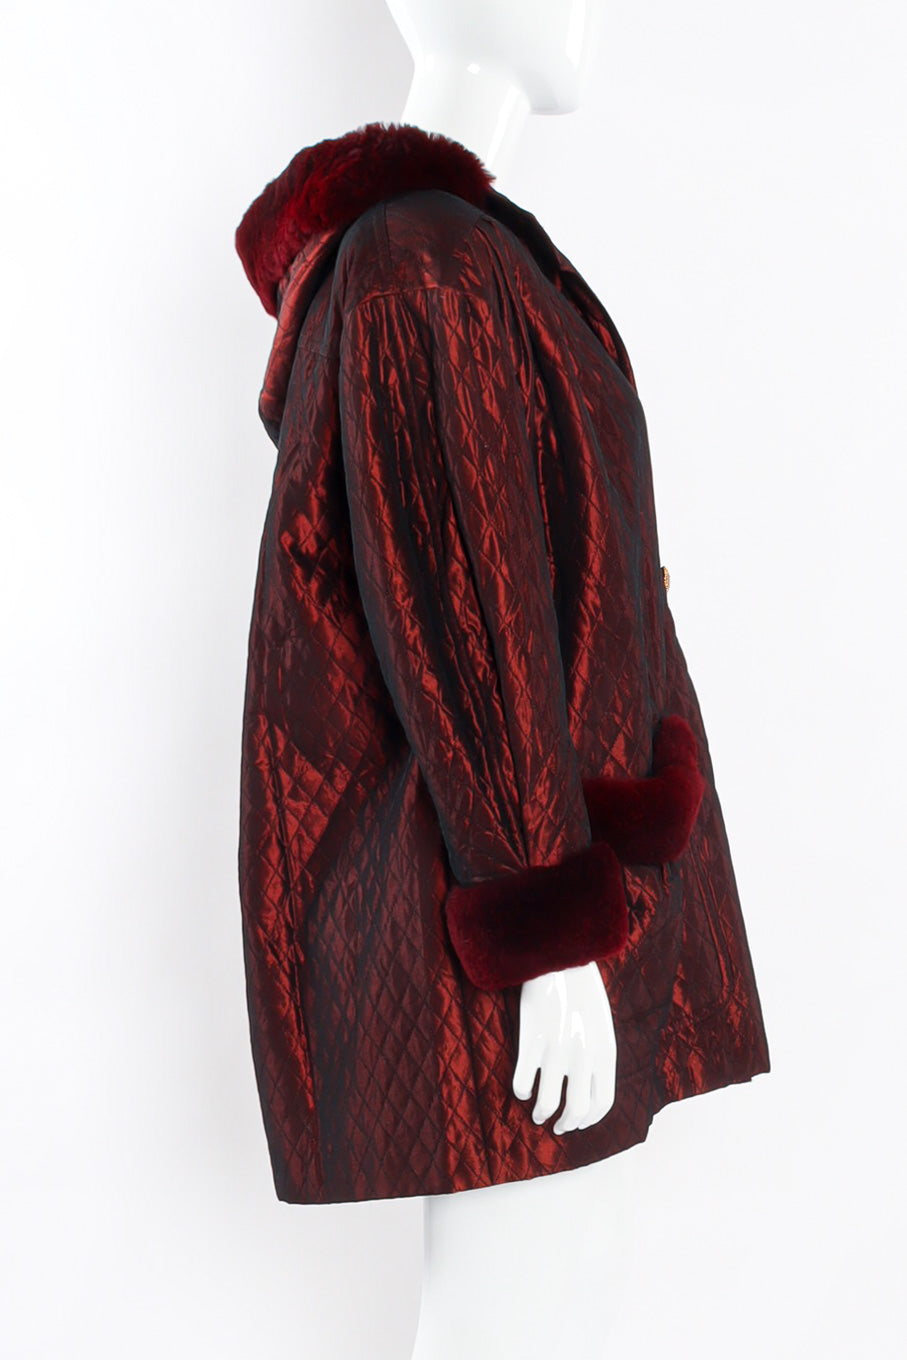 Effervescent quilted burgundy fur lined parka by Yves Saint Laurent side view photo @recessla